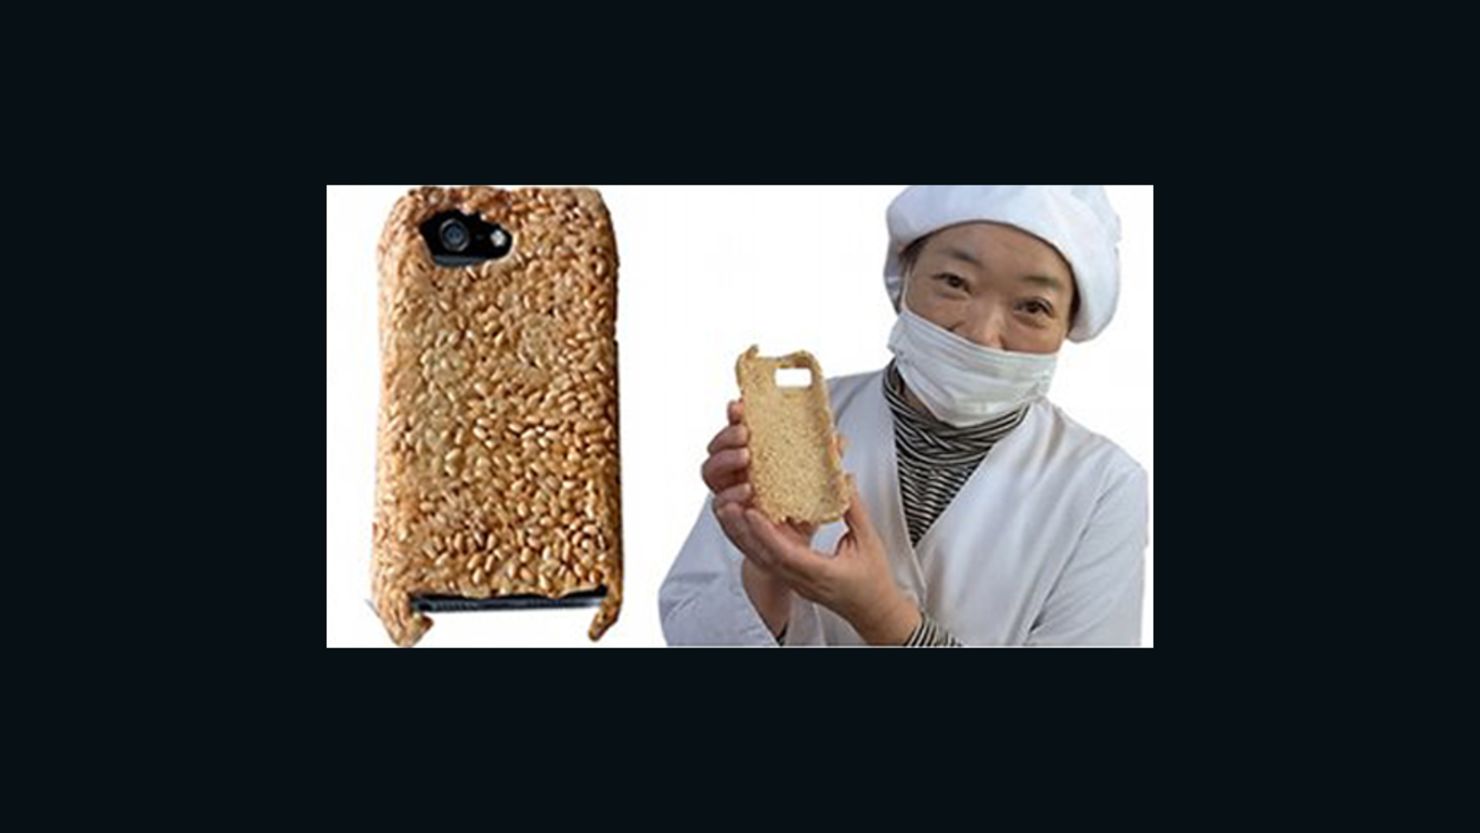 For only $81, the crunchy goodness of the Survival Senbei Rice Cracker iPhone 5 Case could be yours.